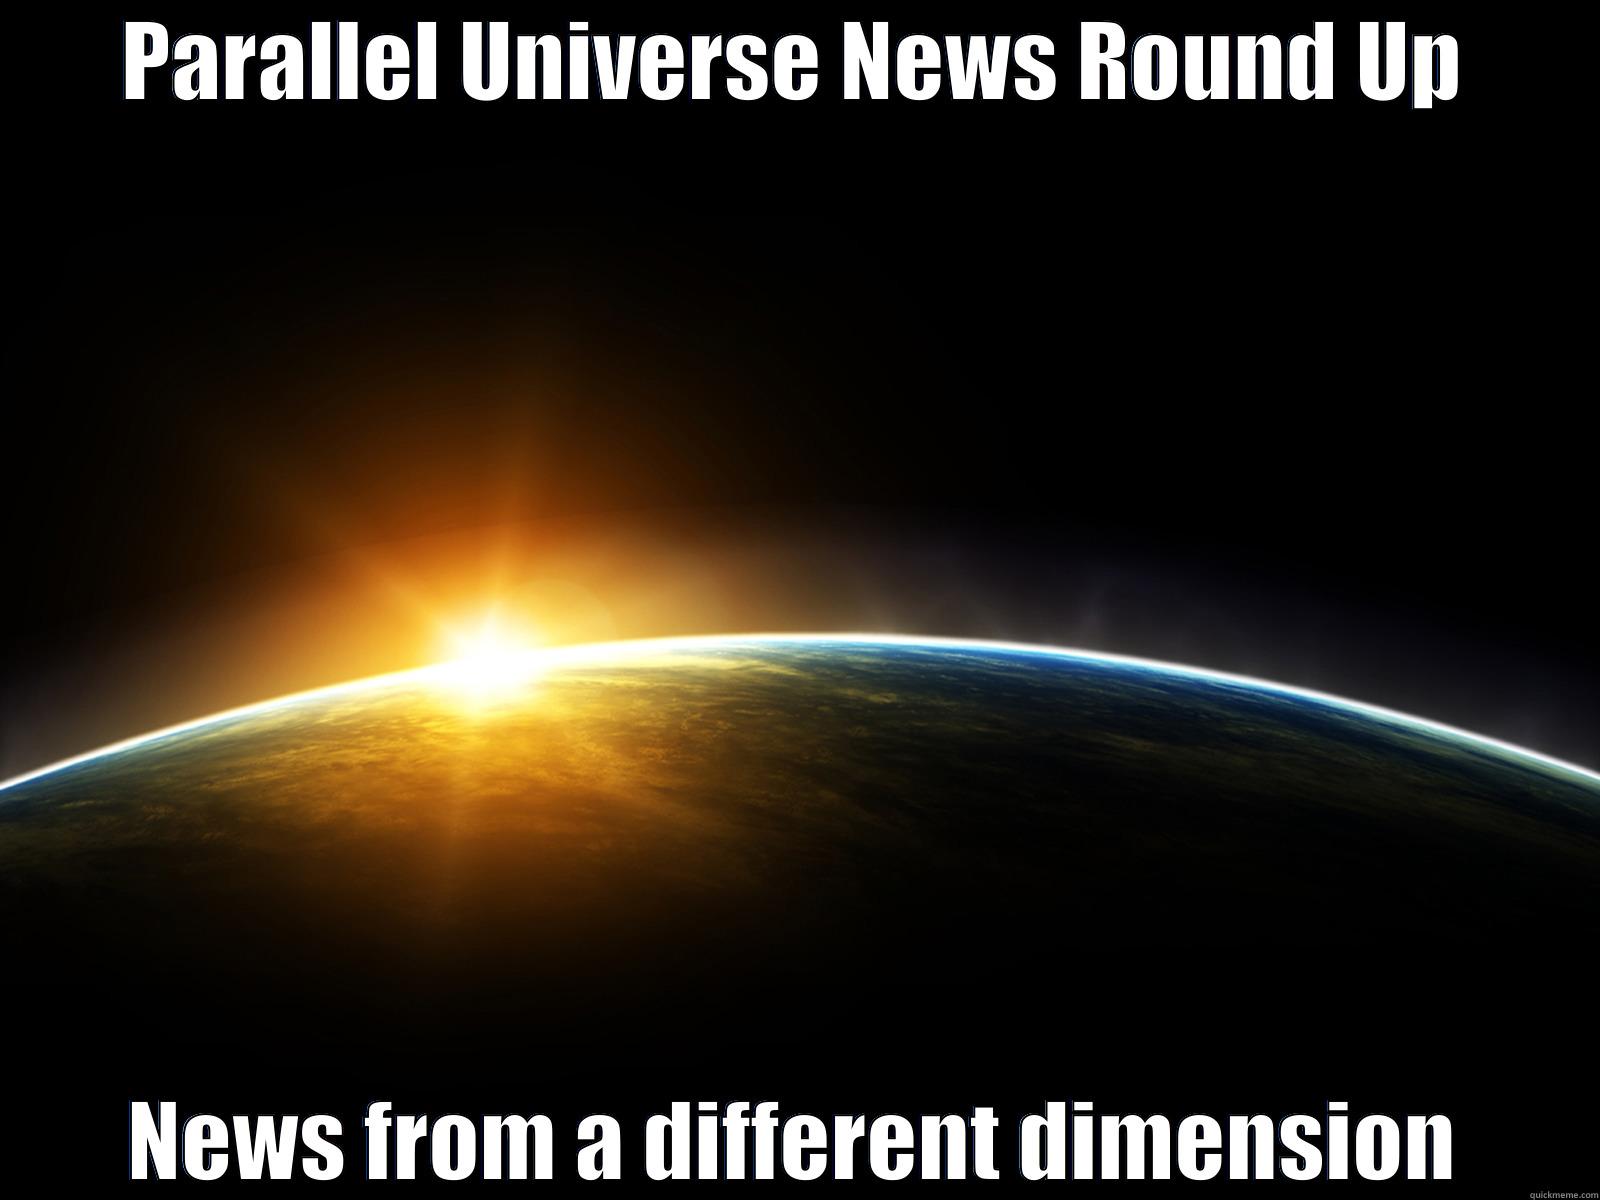 Parallel Universe News Round Up 3.24.14 S1 Ep32